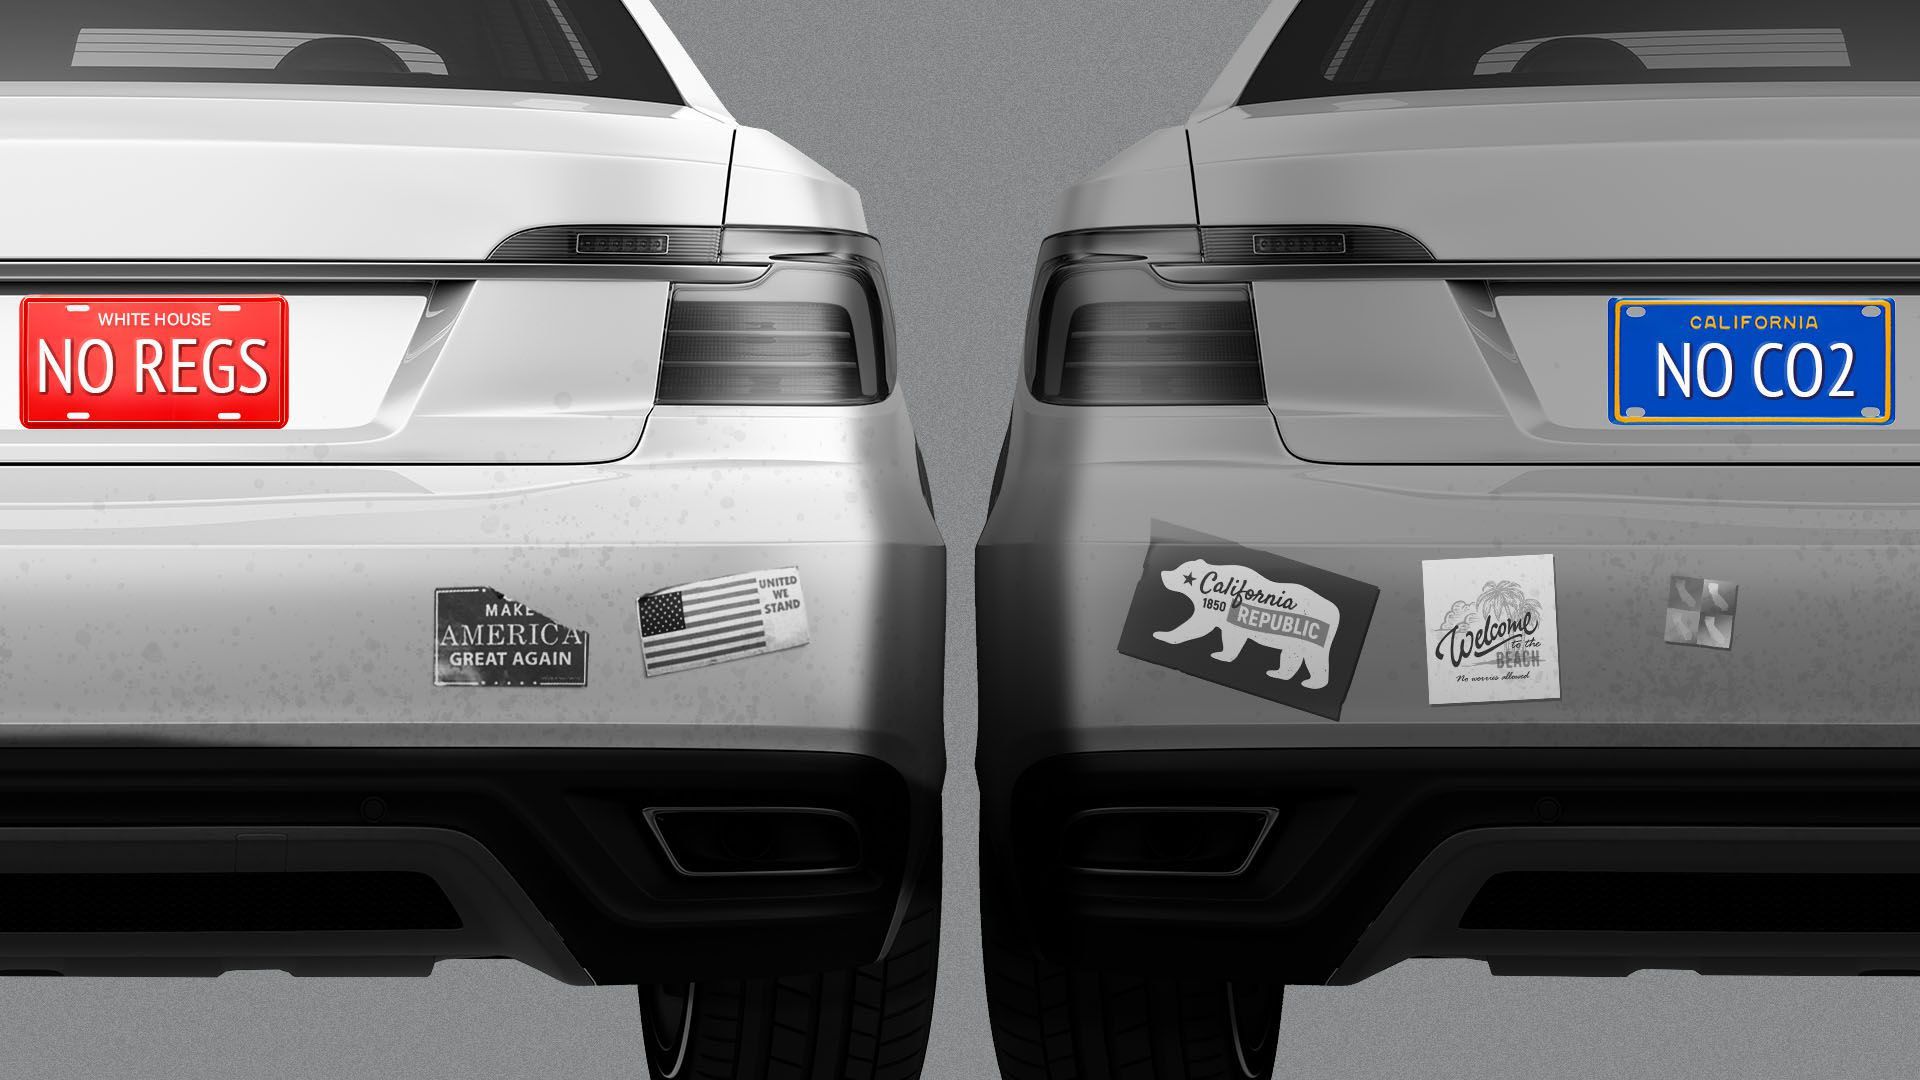 Two cars side by side with bumper stickers calling for very different regulations